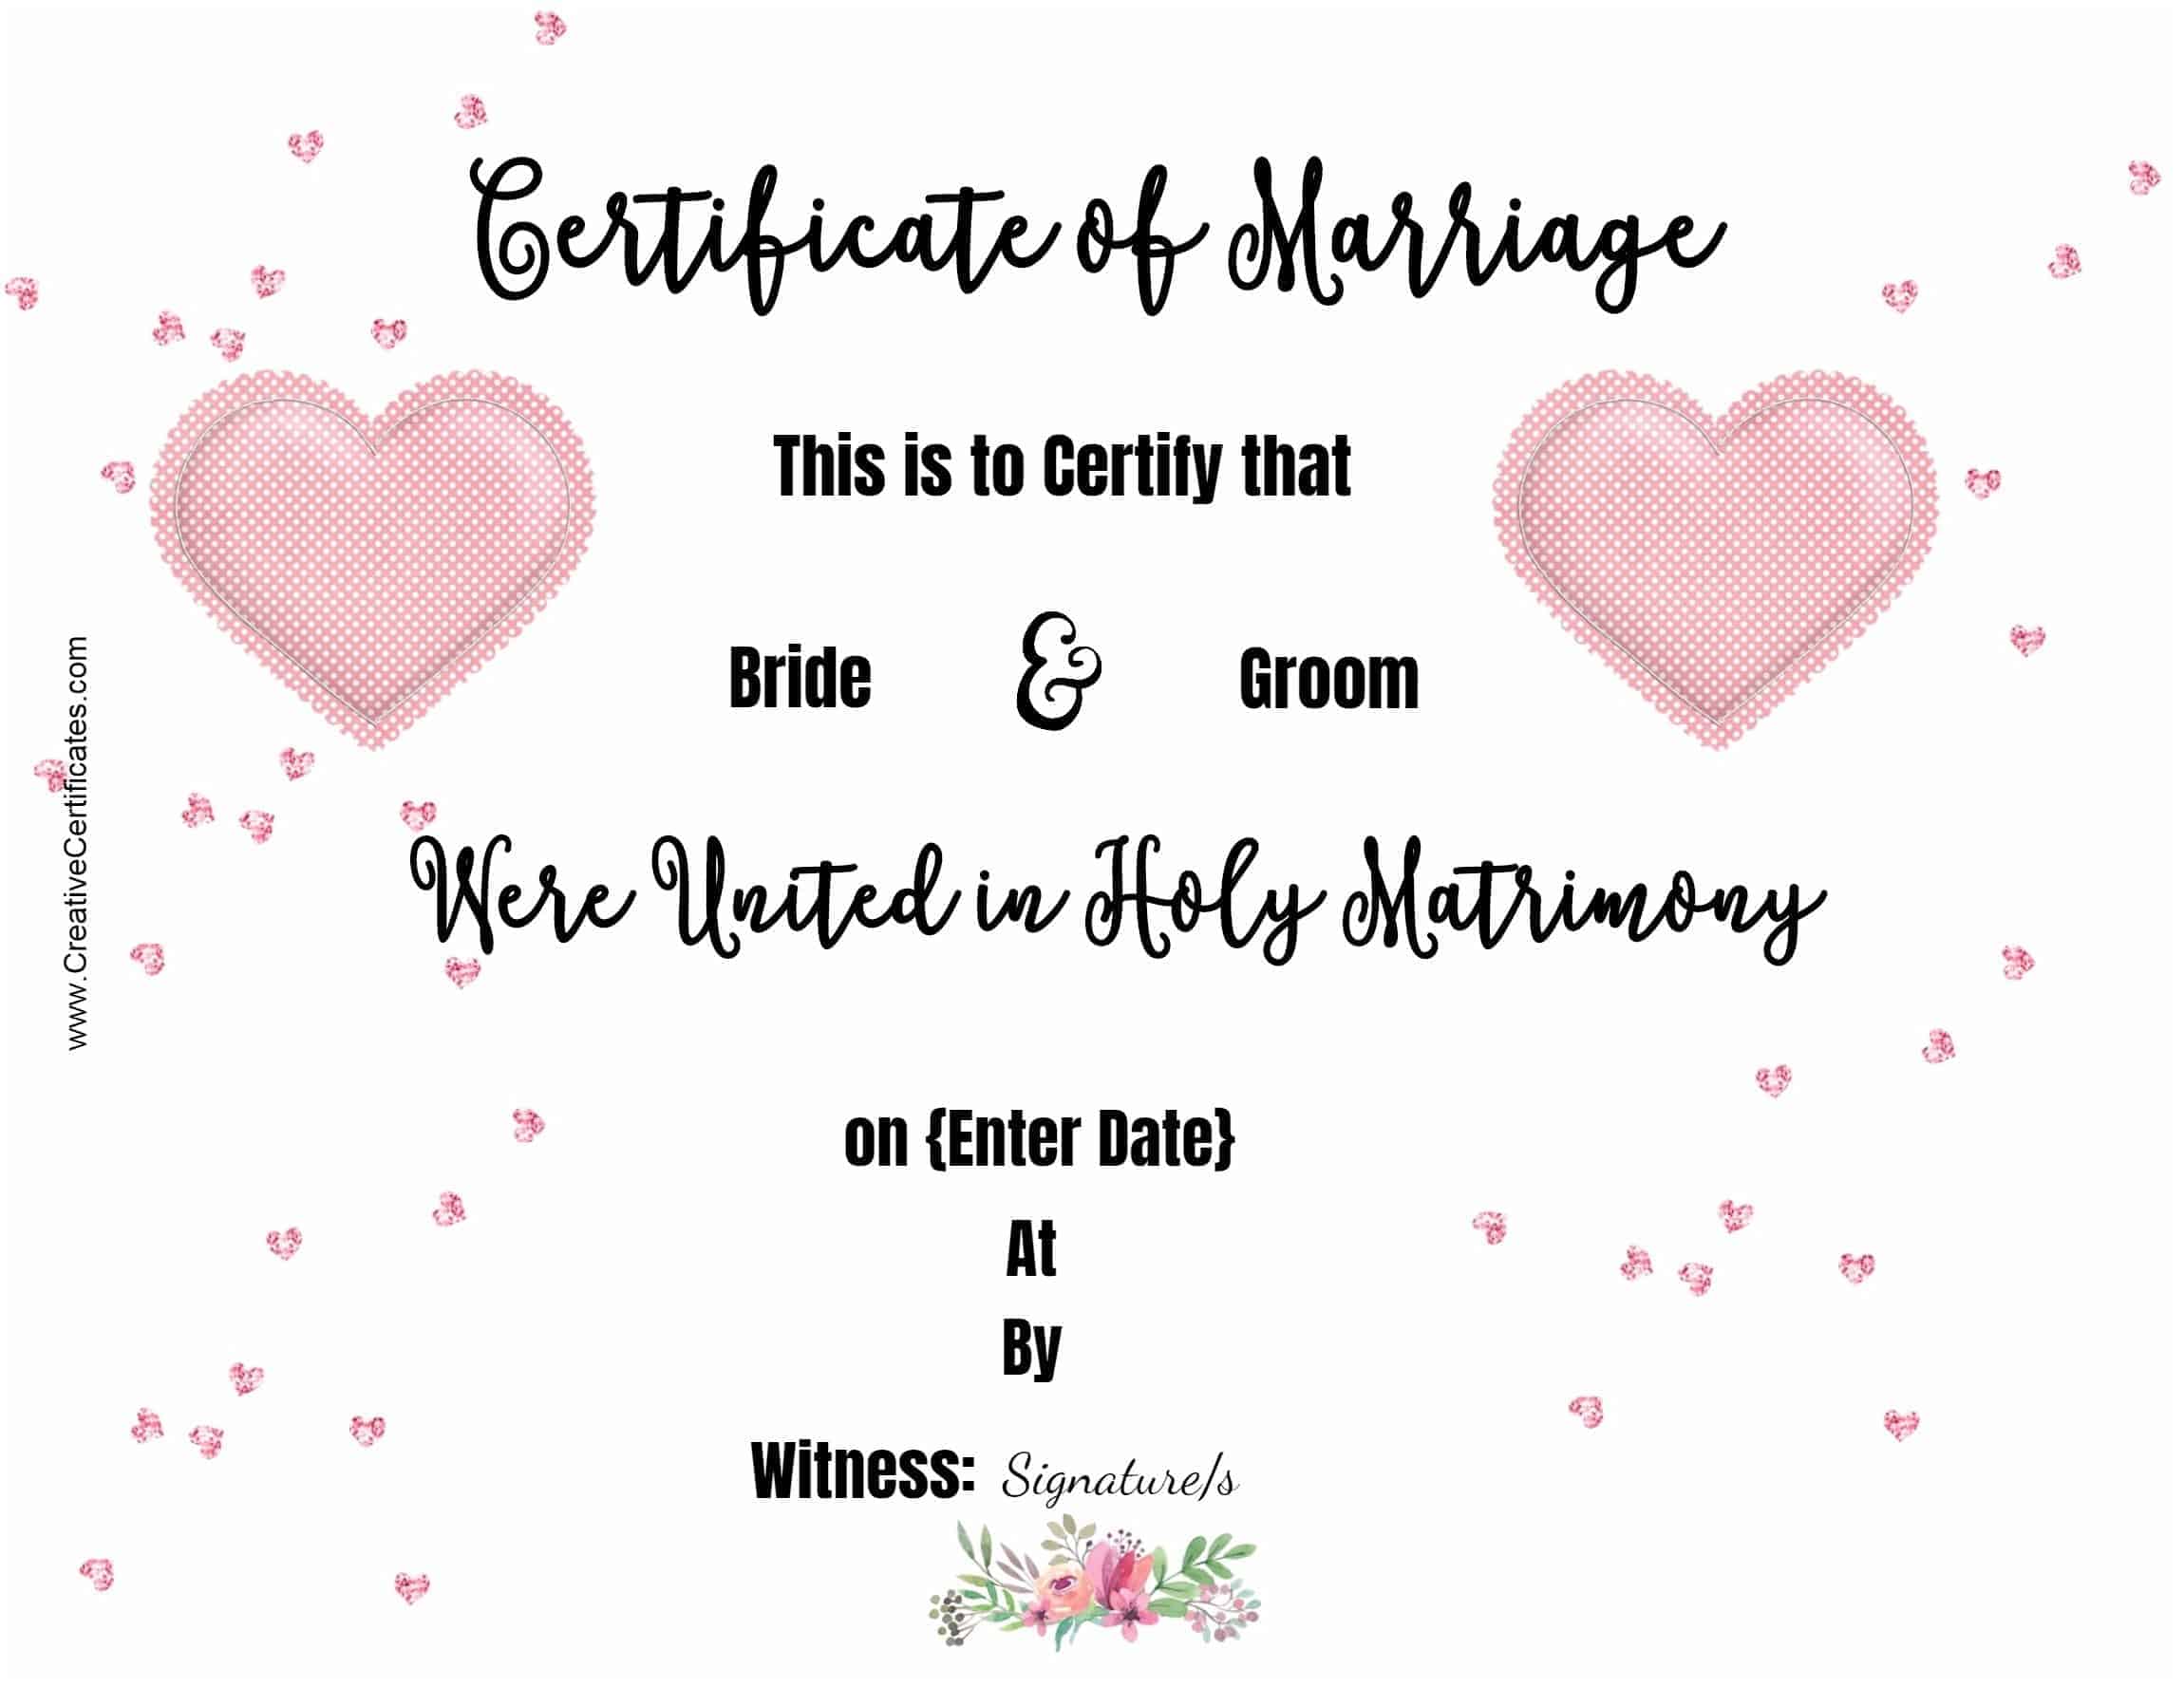 Free Marriage Certificate Template Customize Online then Print